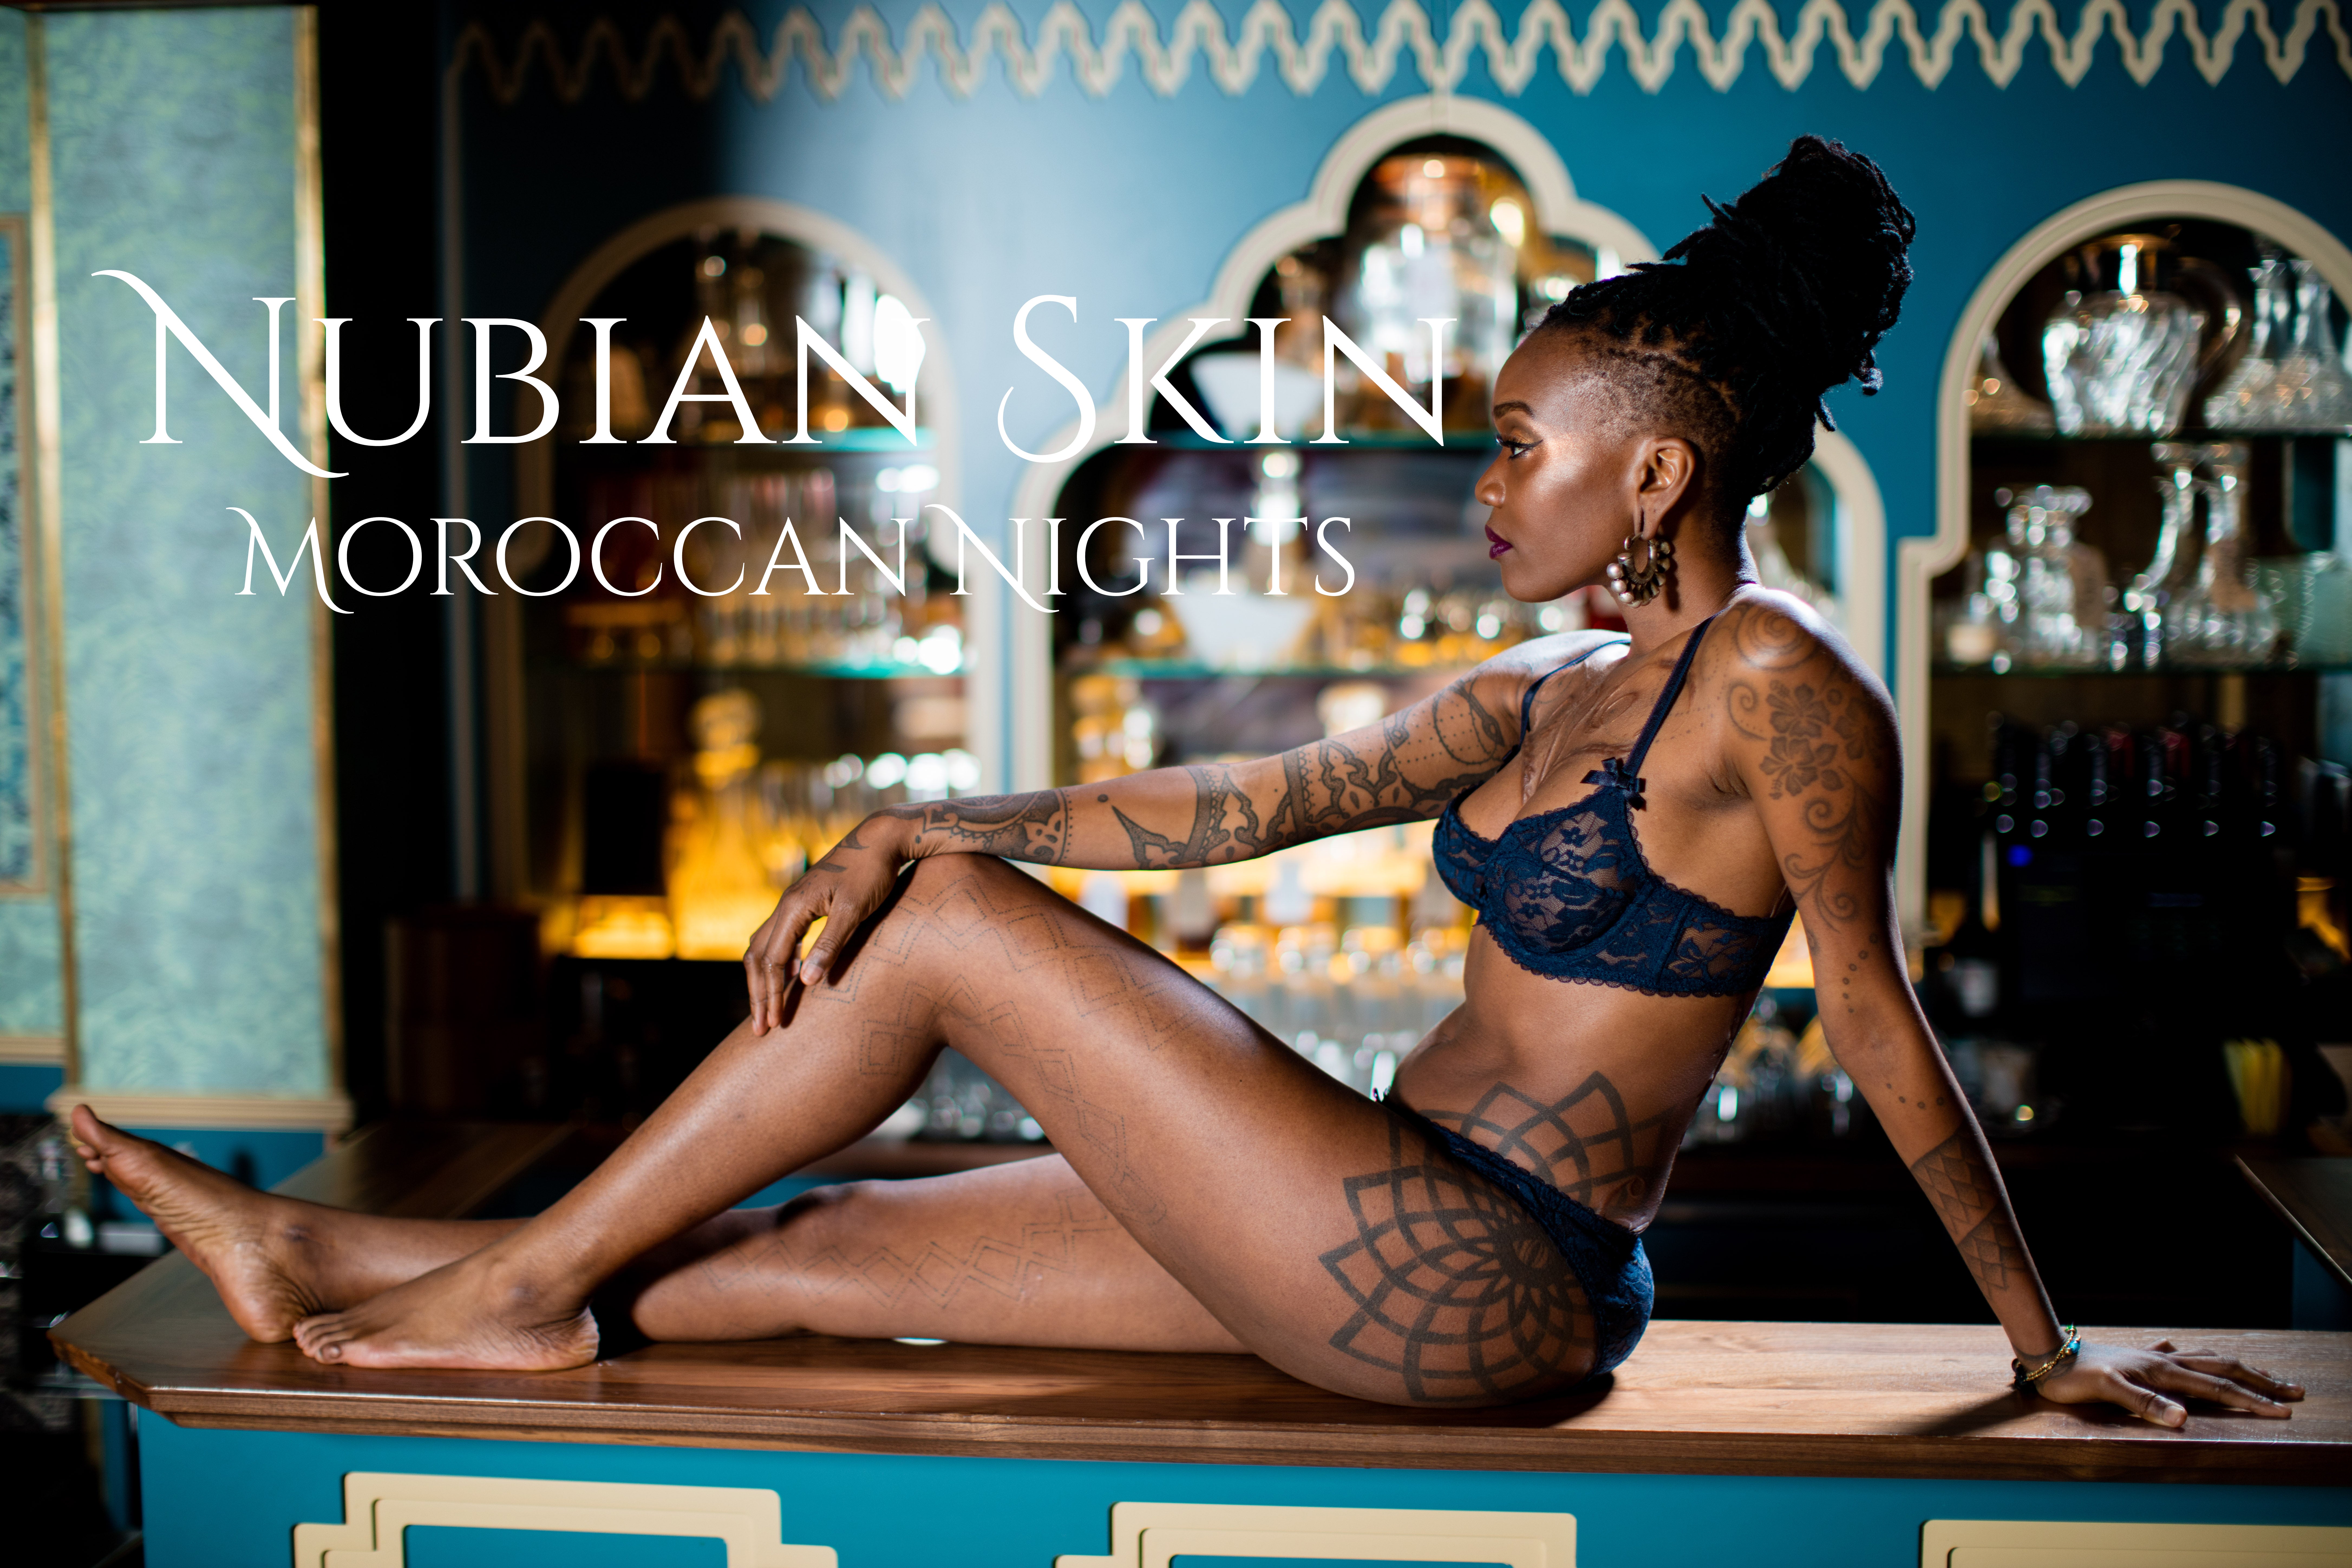 Treat Yourself to This African Inspired and Made Luxury Lingerie Collection
